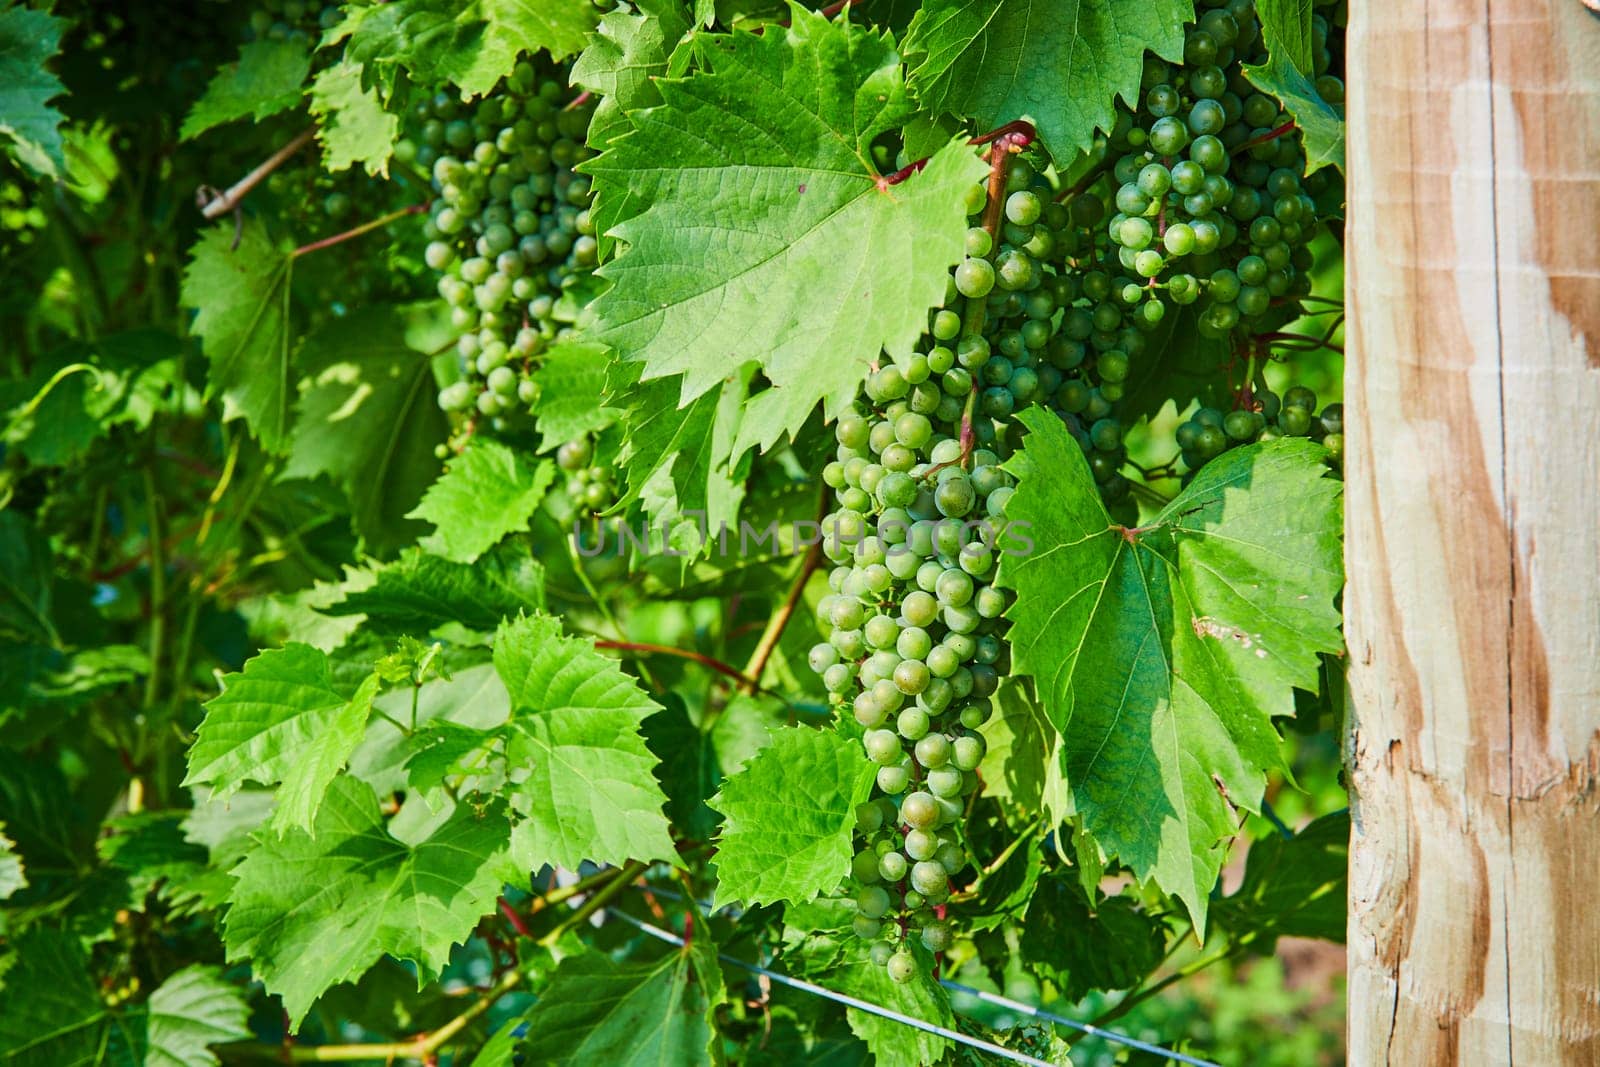 Image of Bunches of green grapes growing on vine with wooden vineyard pole and metal wires